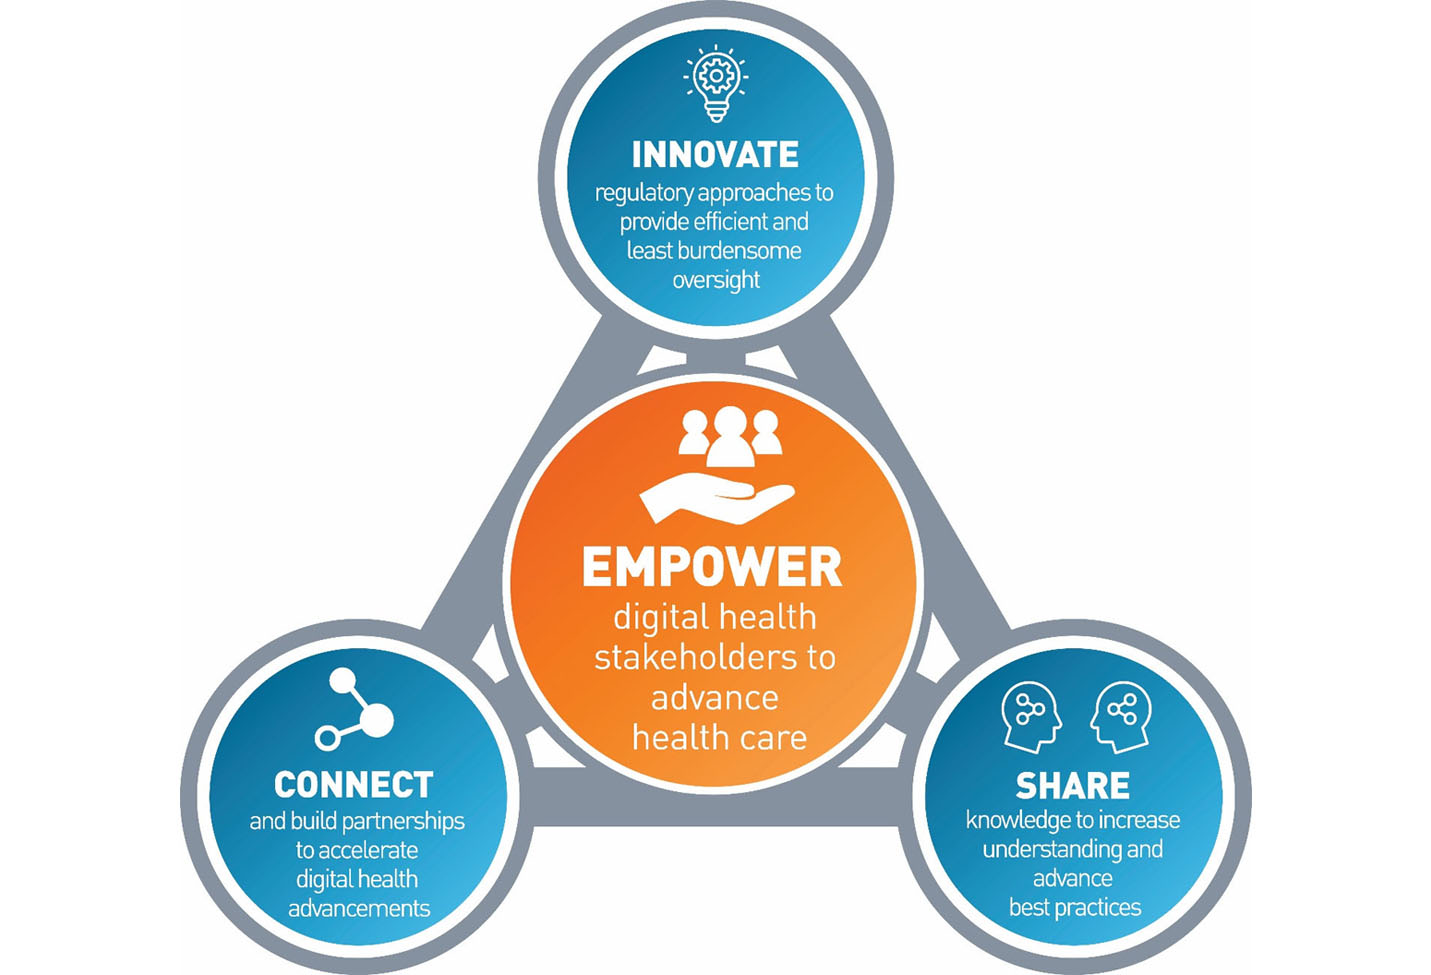 Empower digital health stakeholders to advance health care.  Innovate regulatory approaches to provide efficient and least burdensome oversight.  Connect and build partnerships to accelerate digital health advancements.  Share knowledge to increase understanding and advance best practices.